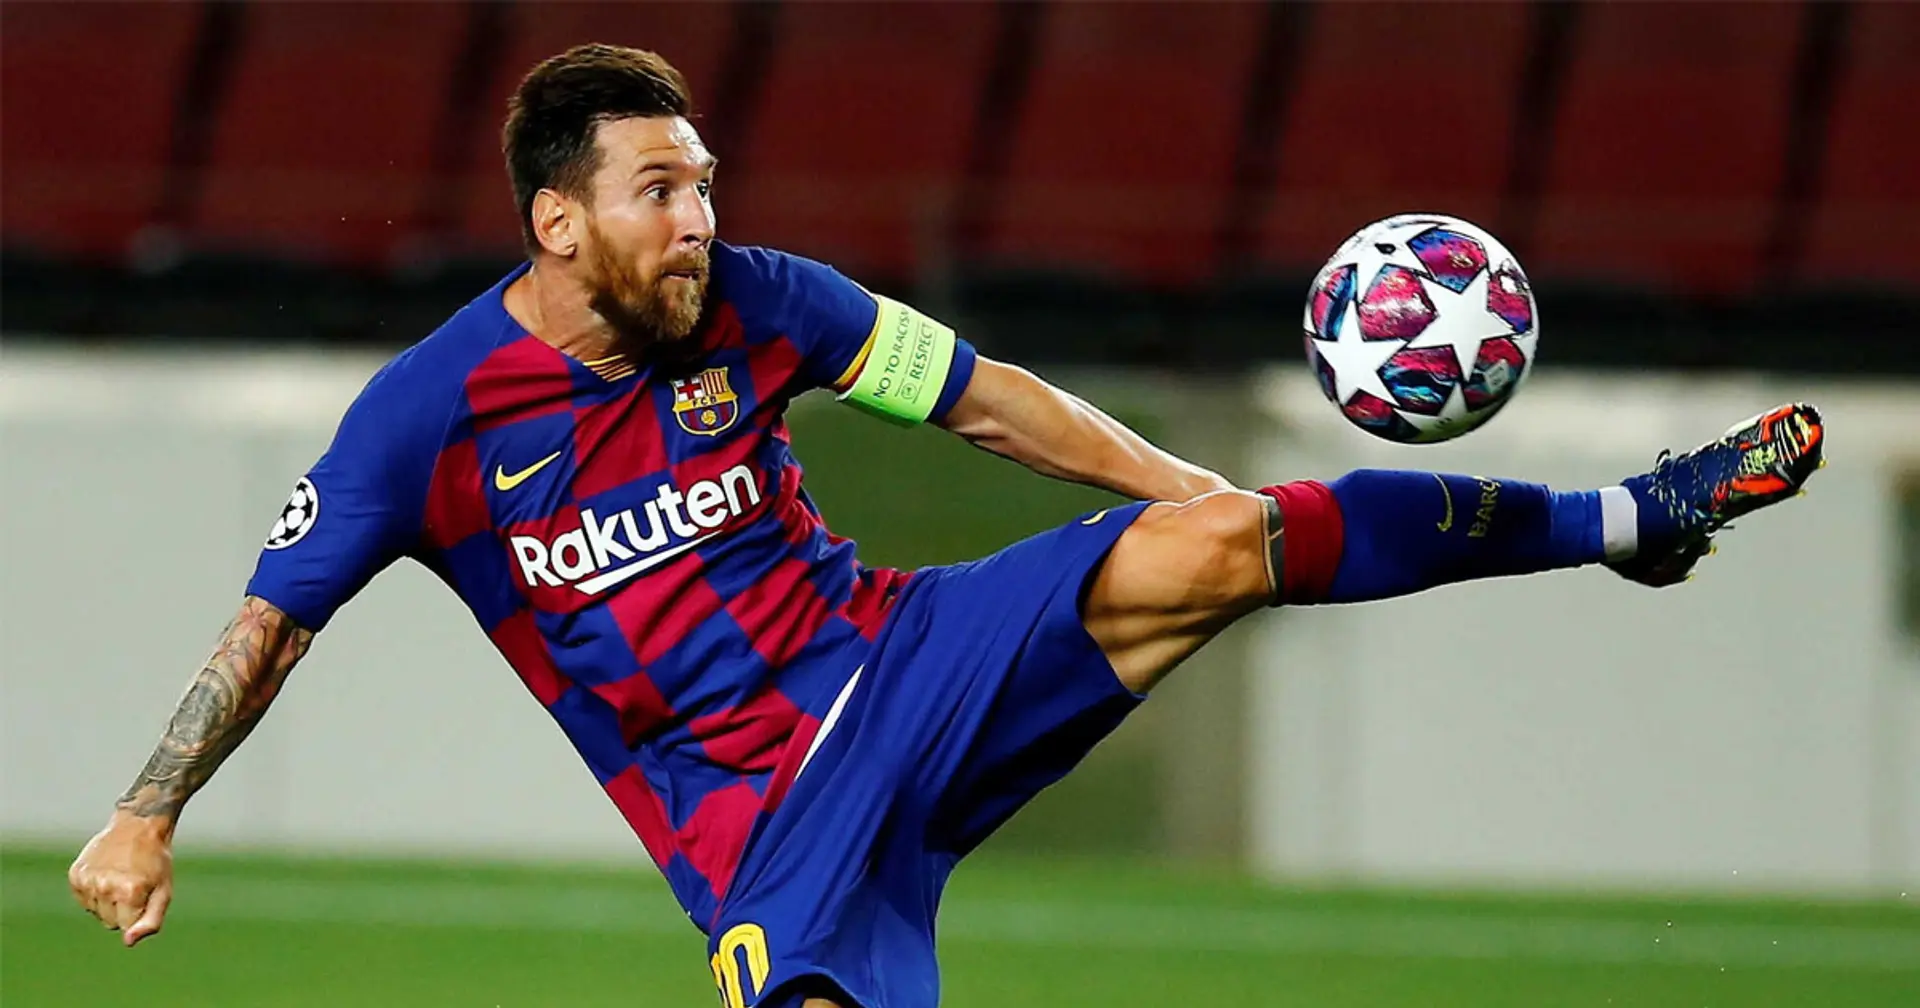 Messi sets new record as Napoli become 35th team he scores past in Champions League